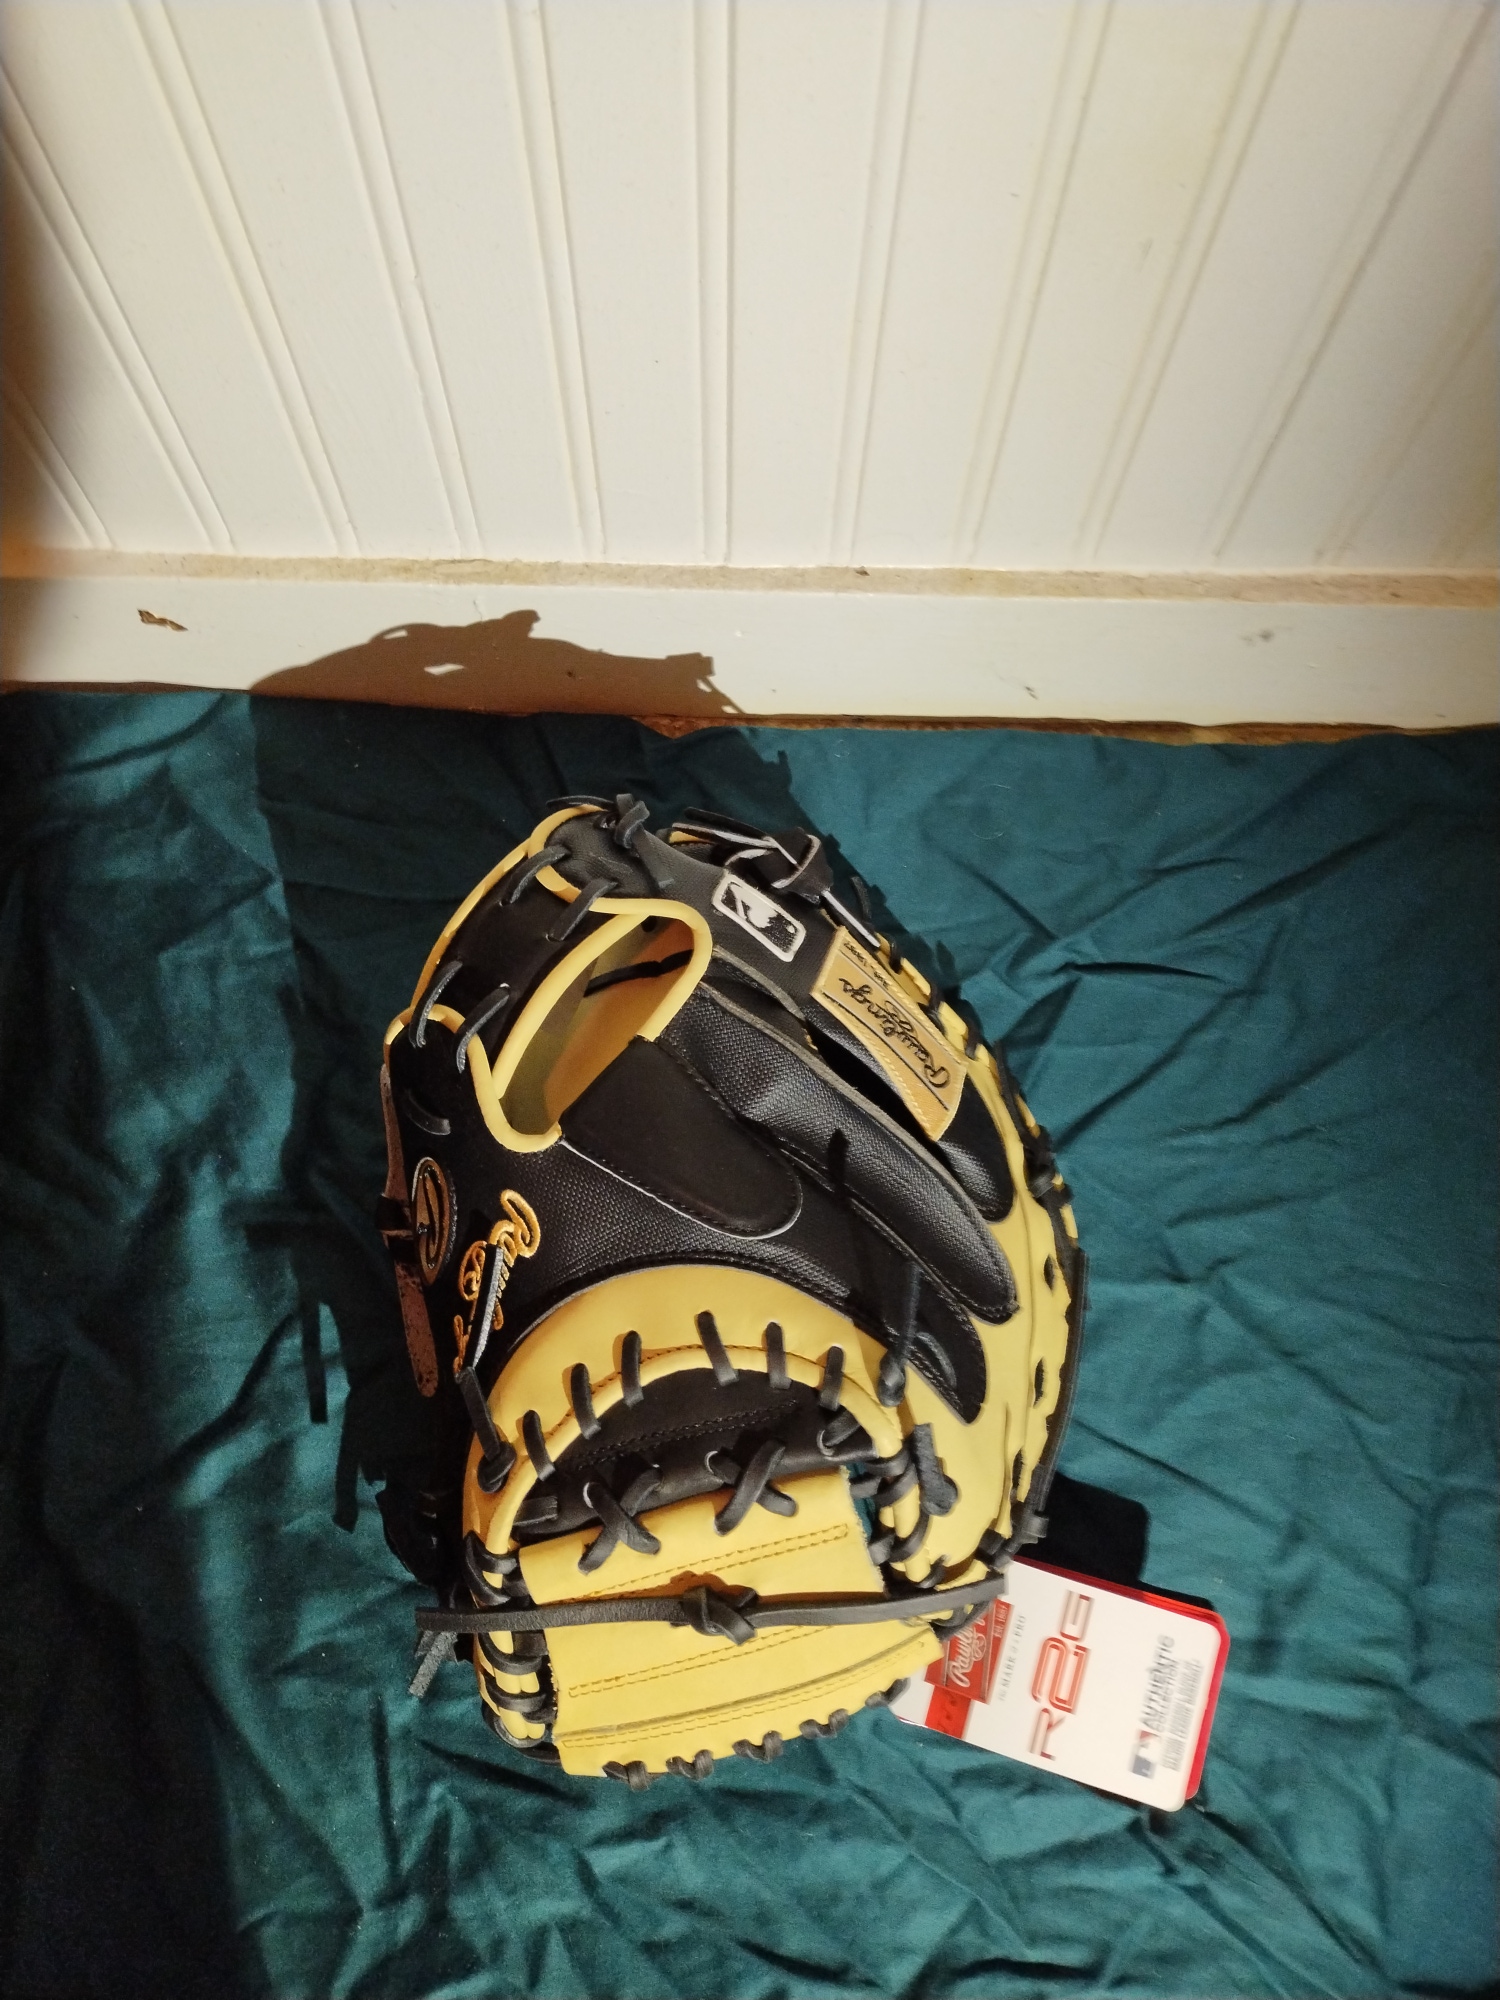 New Rawlings Right Hand Throw Heart of the hide Catcher's Glove